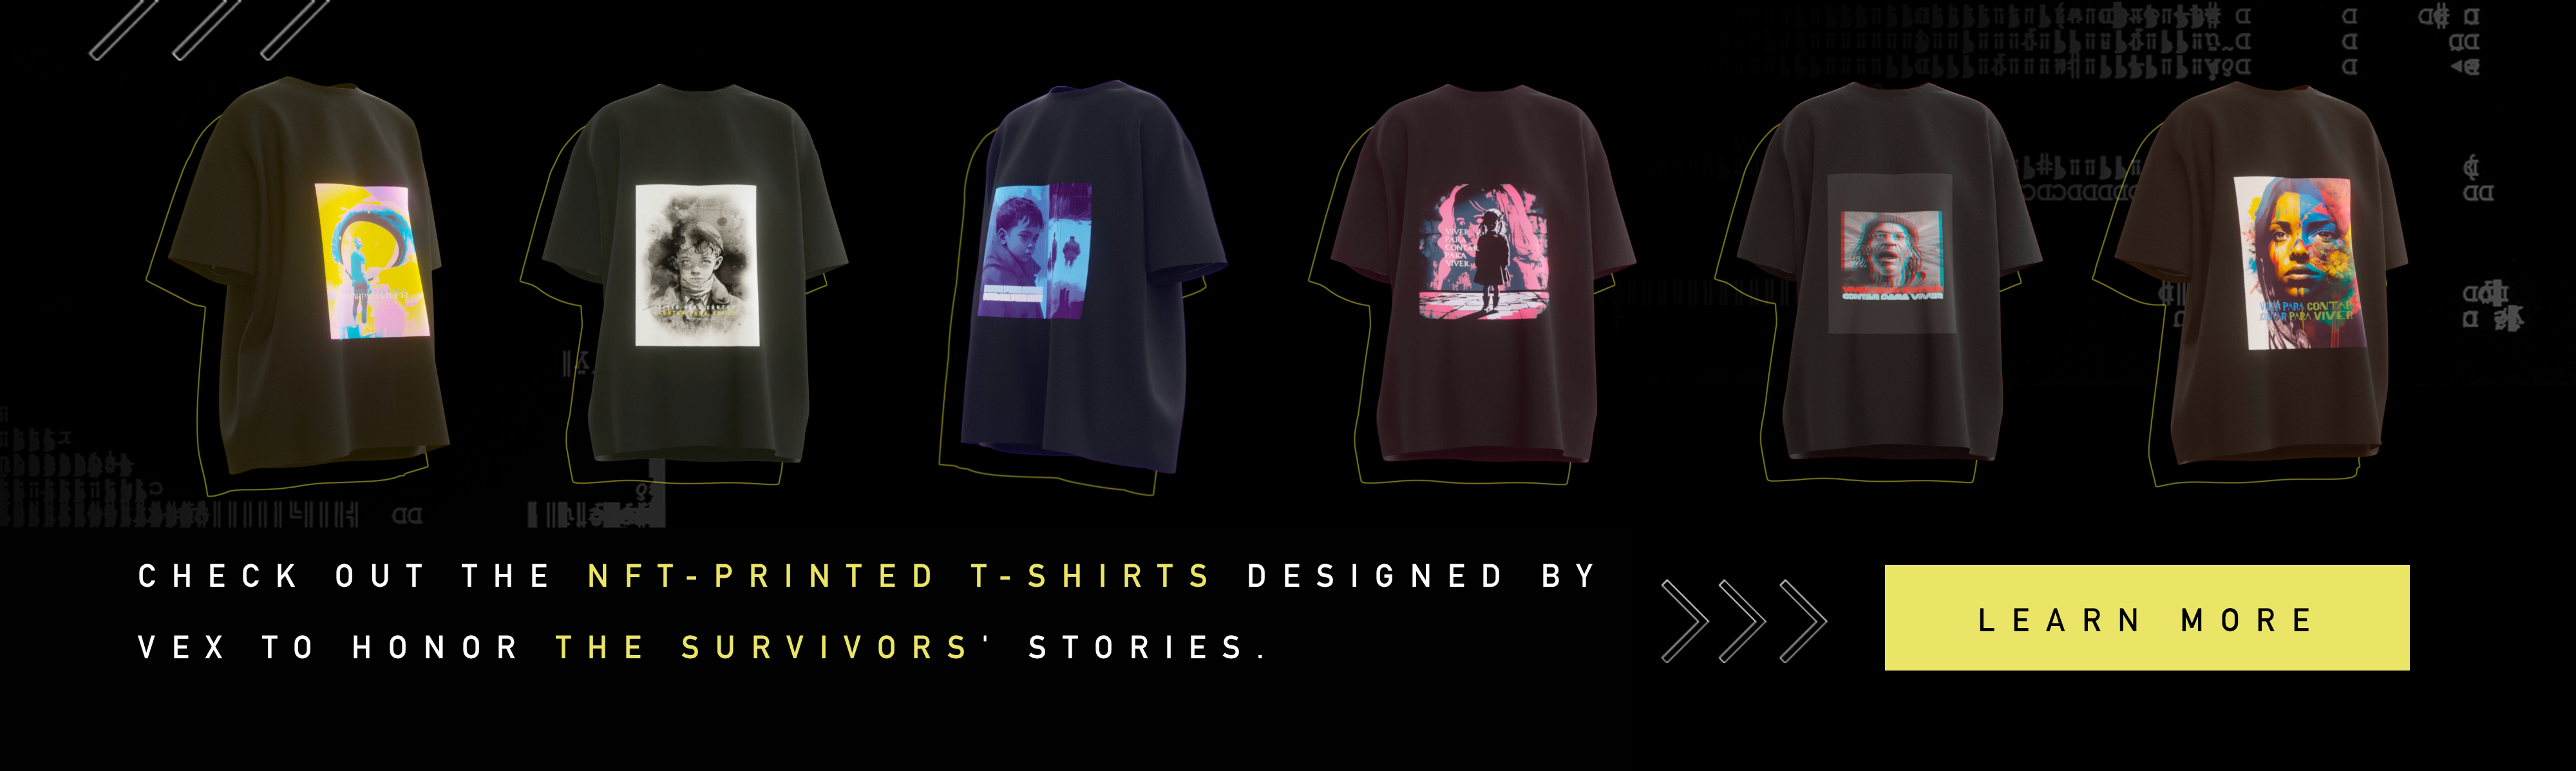 Check out the NFT-printed t-shirts designed by VEX to honor the survivors' stories.